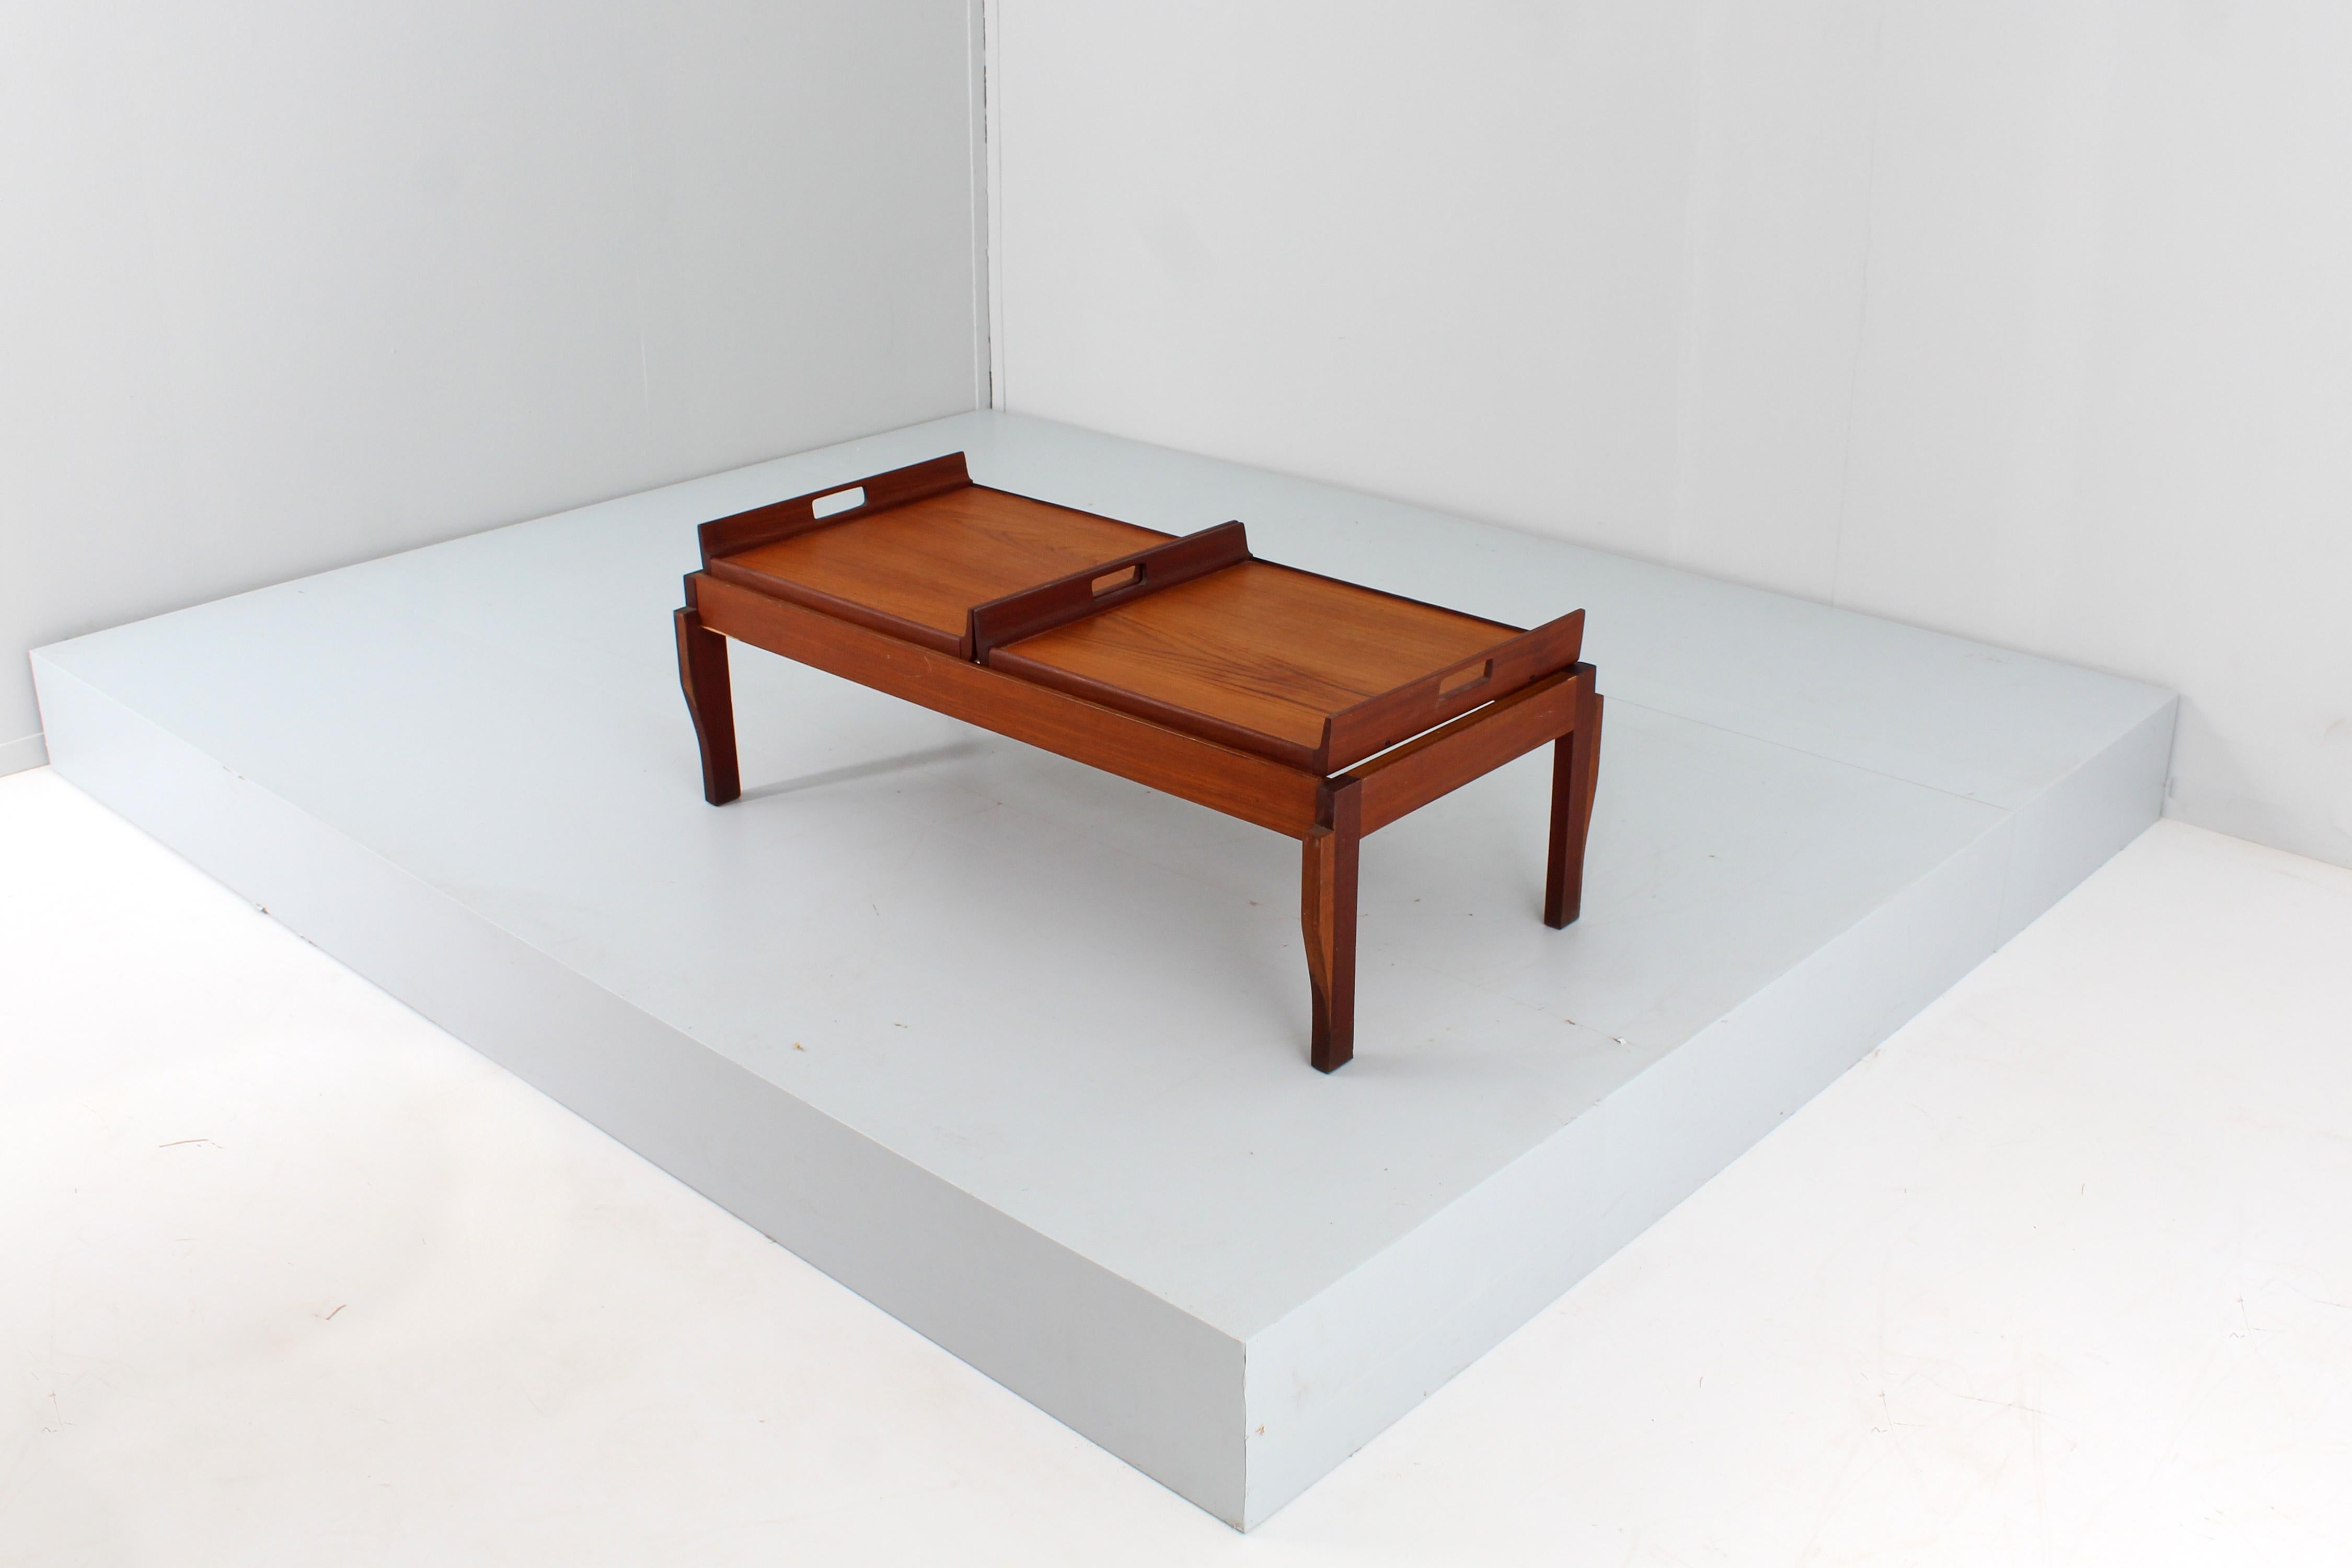 Italian Mid-Century Cantù Wooden Teak Coffee Table with Two Removable Trays 60s Italy For Sale